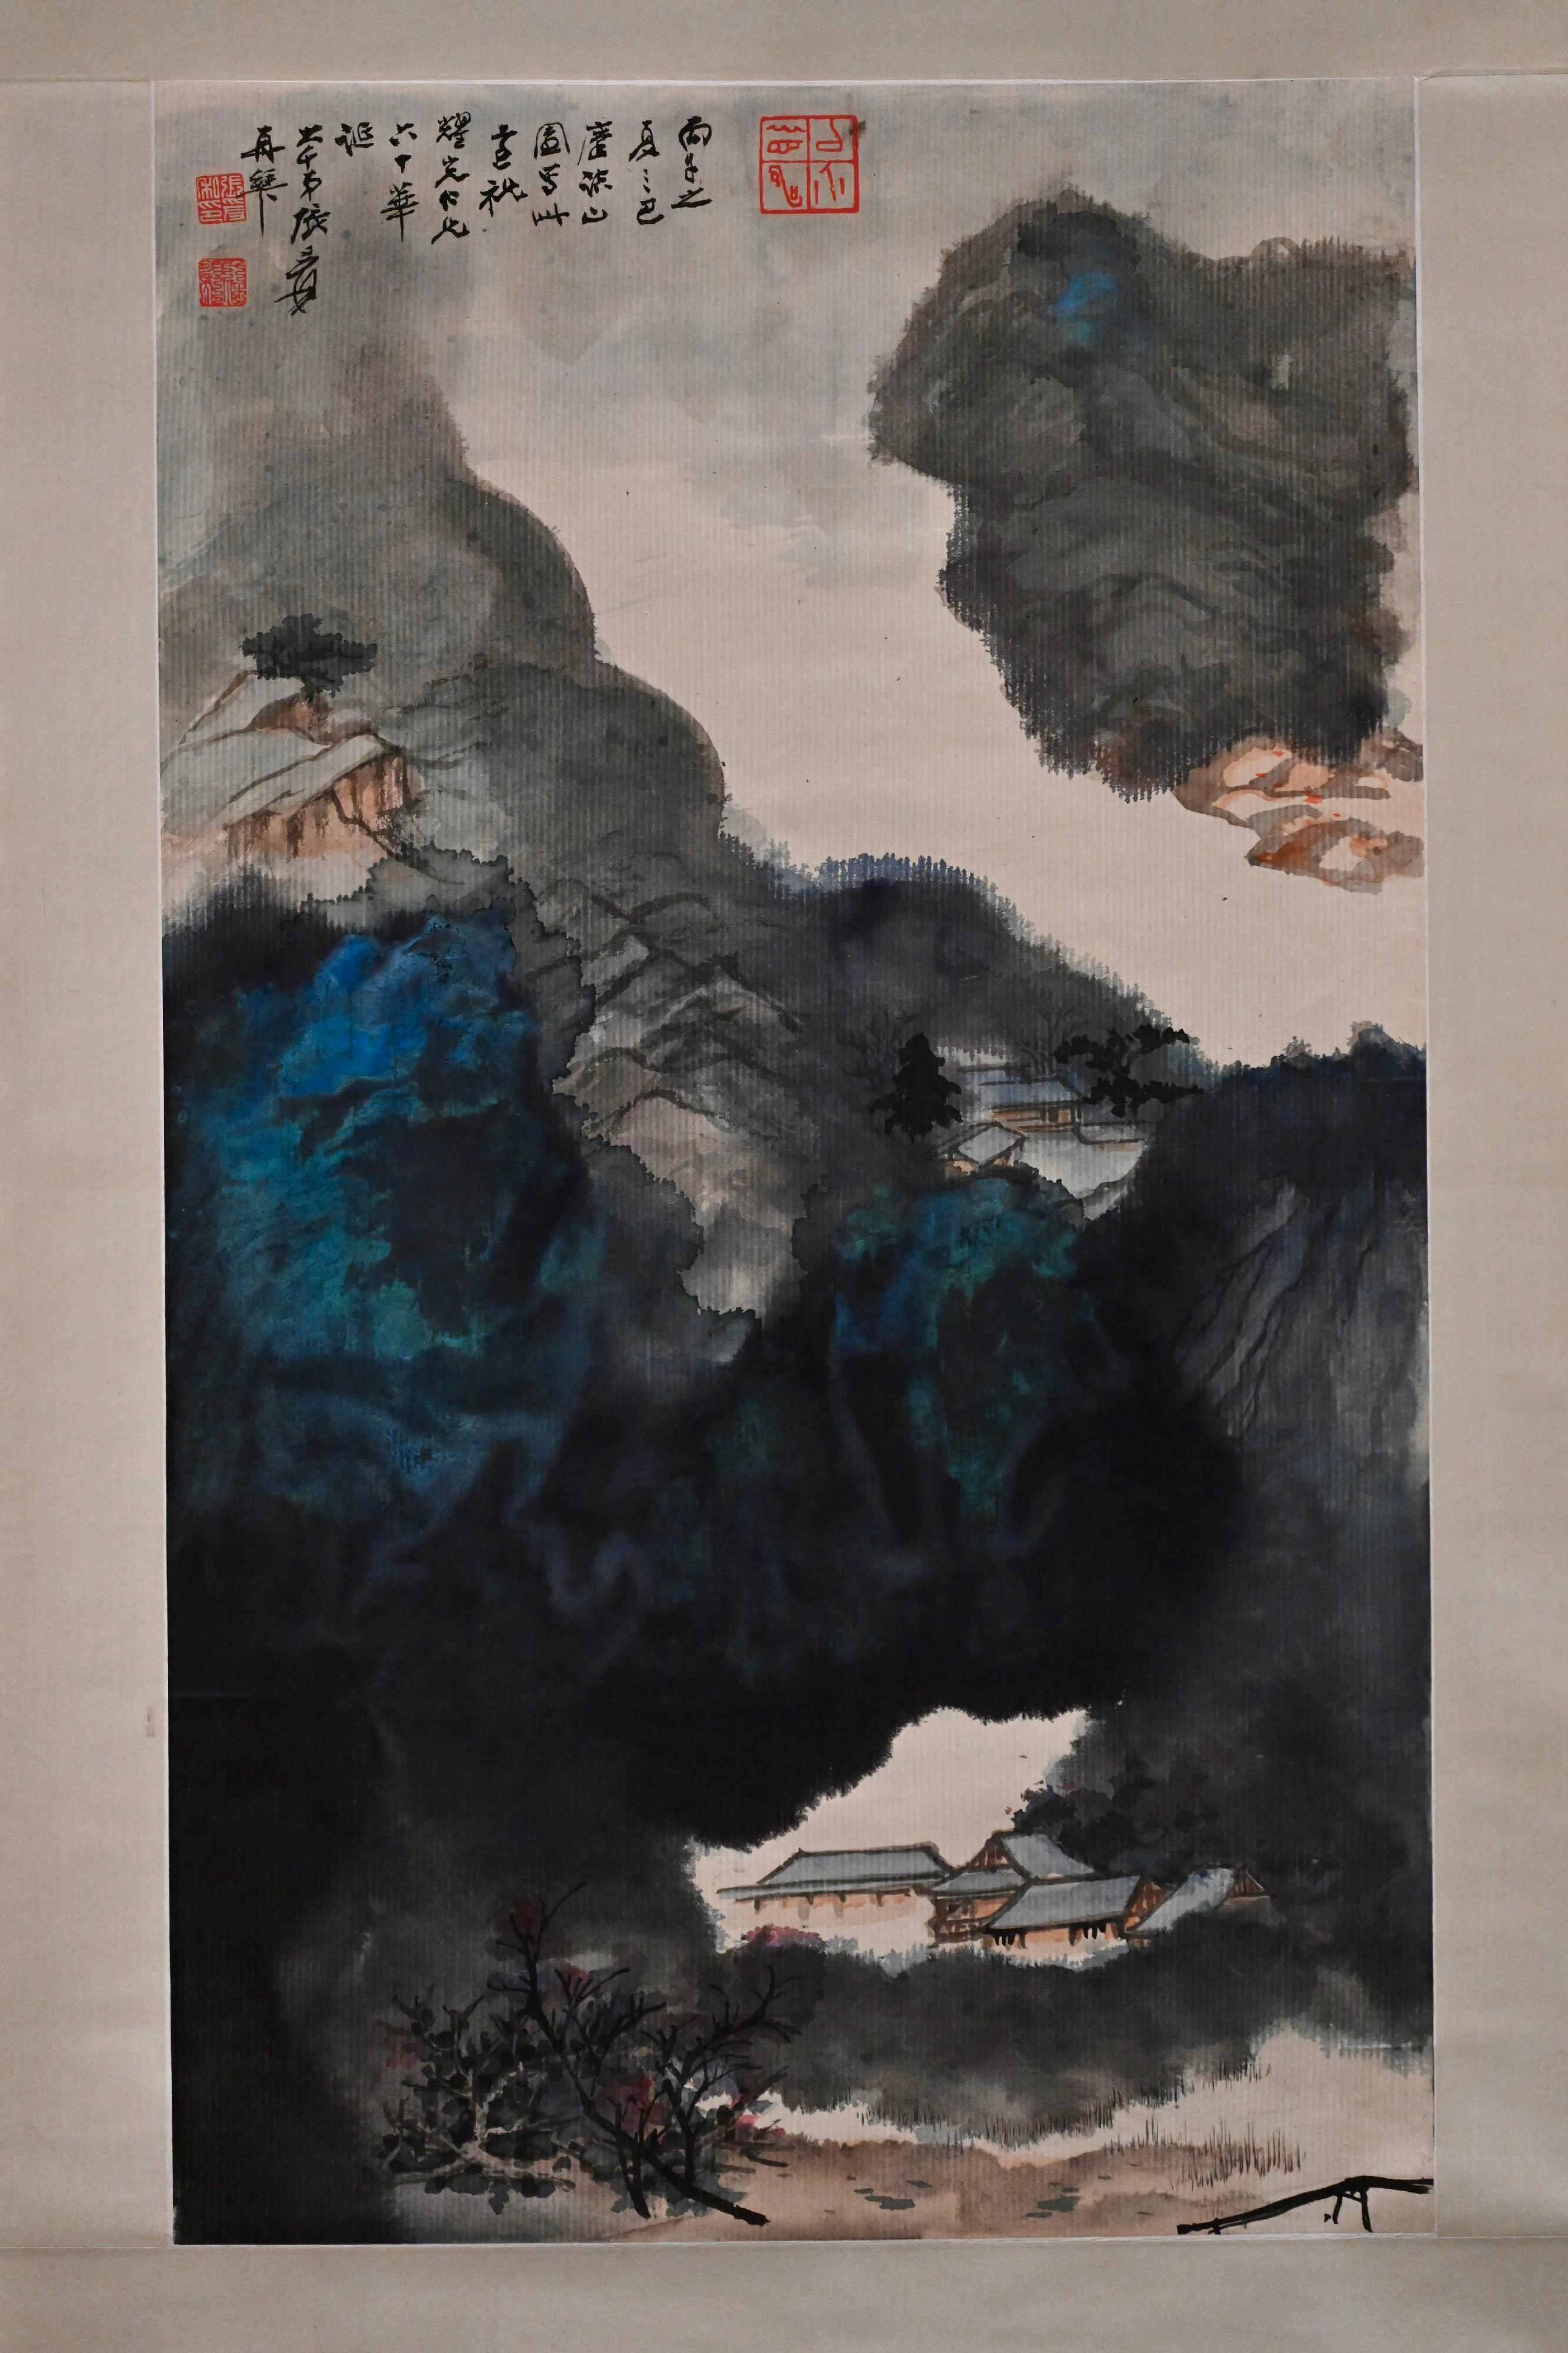 "Beyond Blessings: Birthday Greetings for the Master of Chih Lo Lou" exhibition will be held at the Hong Kong Museum of Art from tomorrow (July 14). Picture shows the painting "Splashed-Colour Landscape" gifted to Ho Iu-kwong by Zhang Daqian.